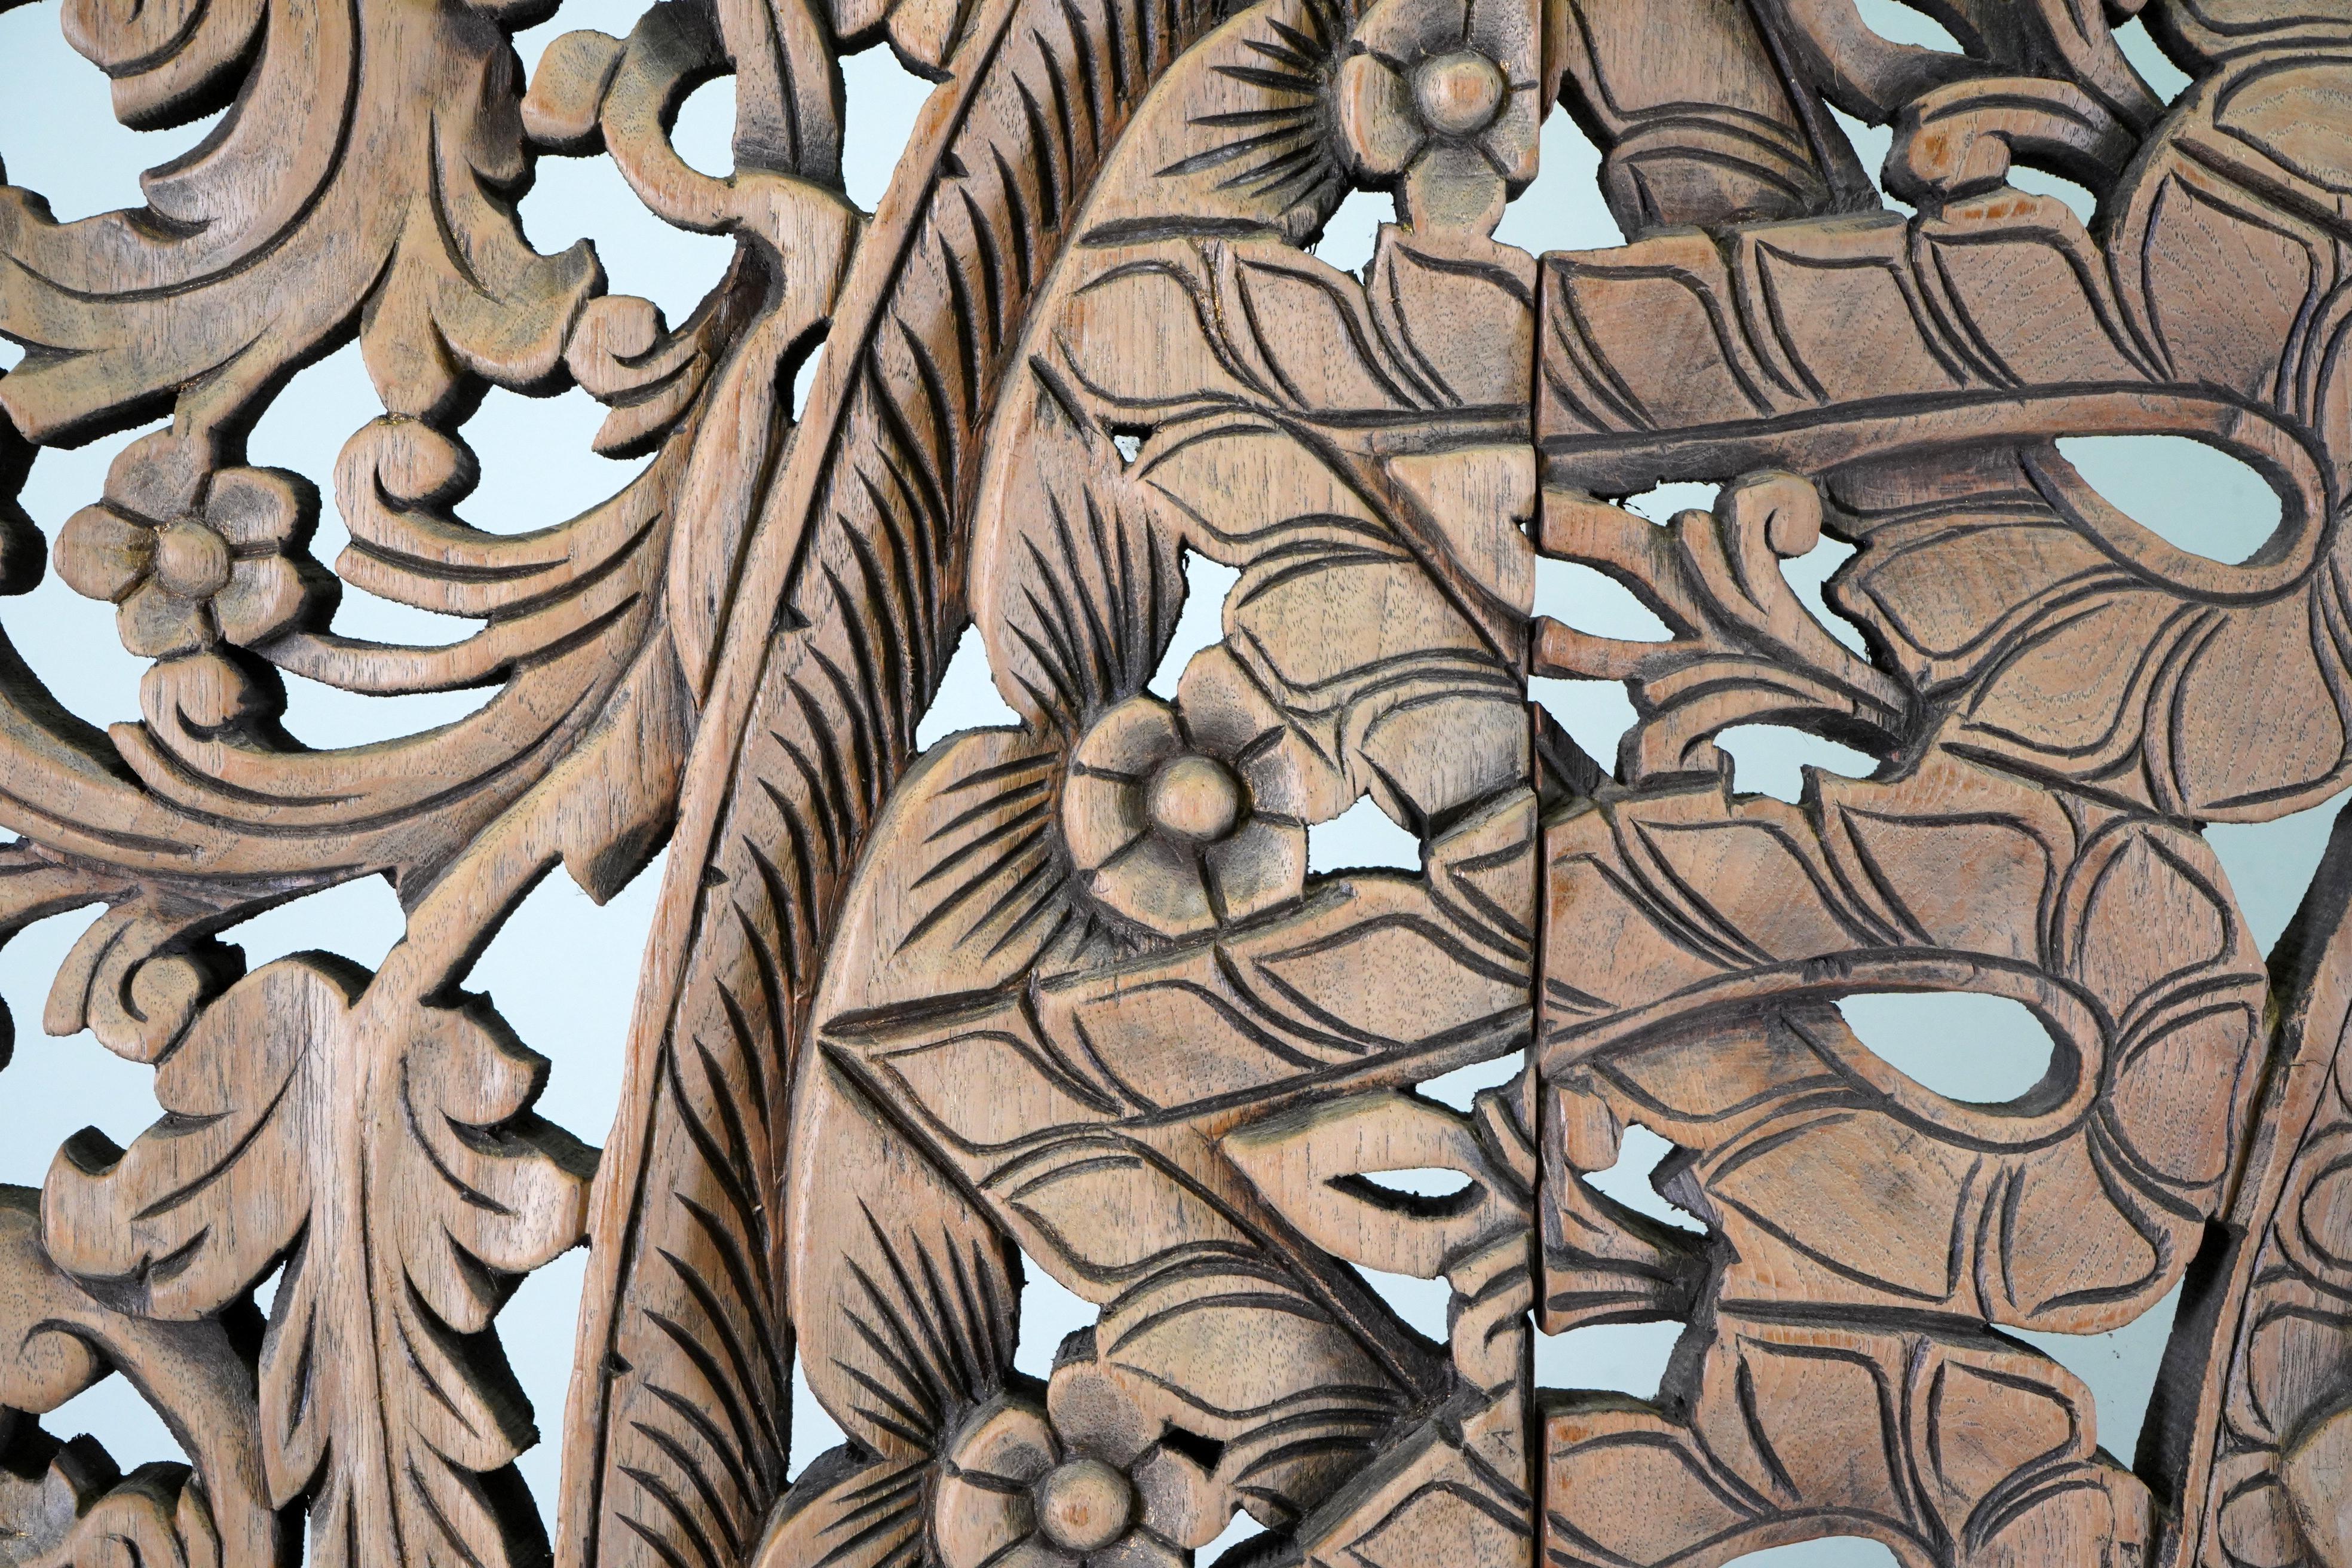 Contemporary A Carved Teak Wood Lotus Flower Panel 8' x 8'